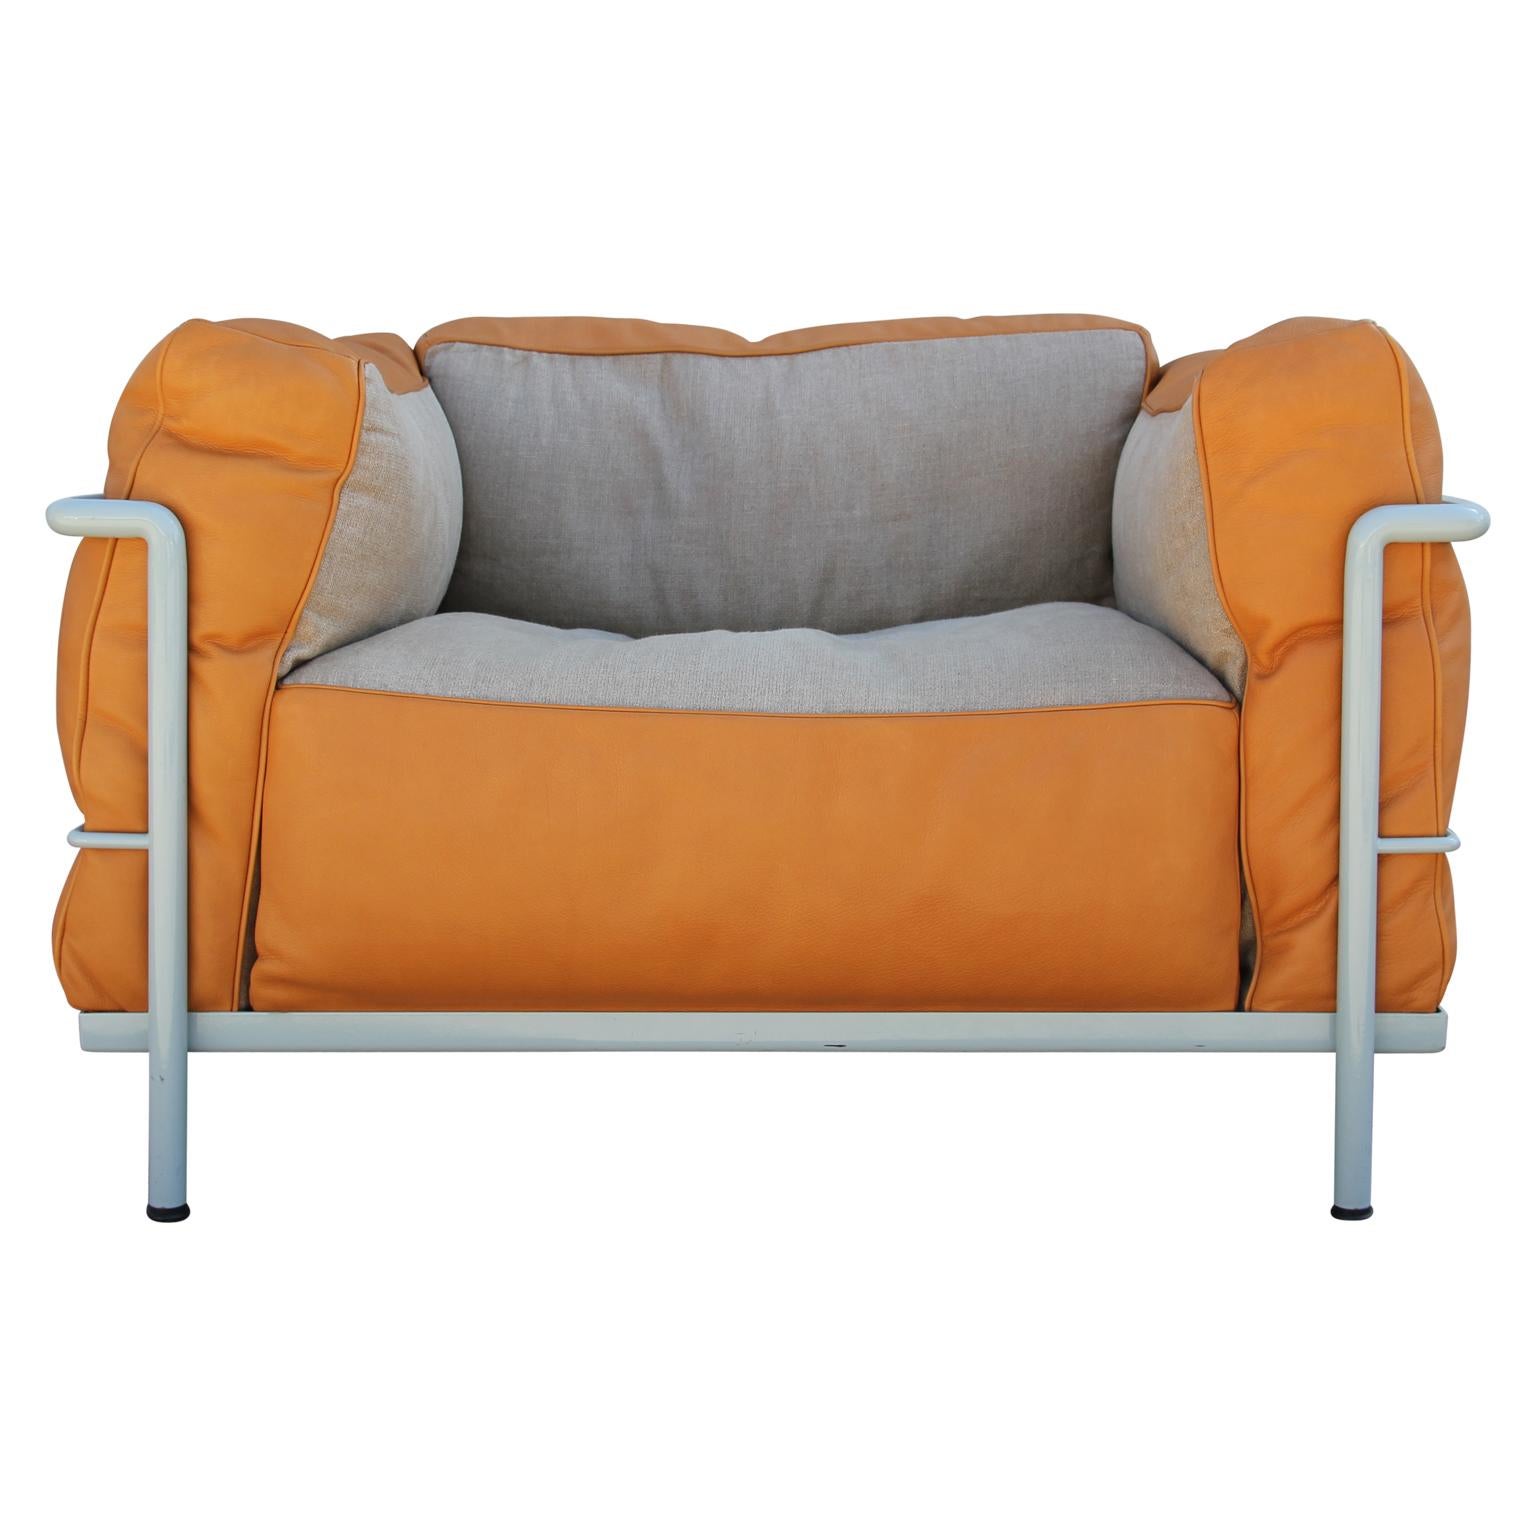 Unique limited edition LC3 Le Corbusier armchairs with orange leather and tan fabric cushions and white framing. The Le Corbusier group referred to their LC3 collections as 